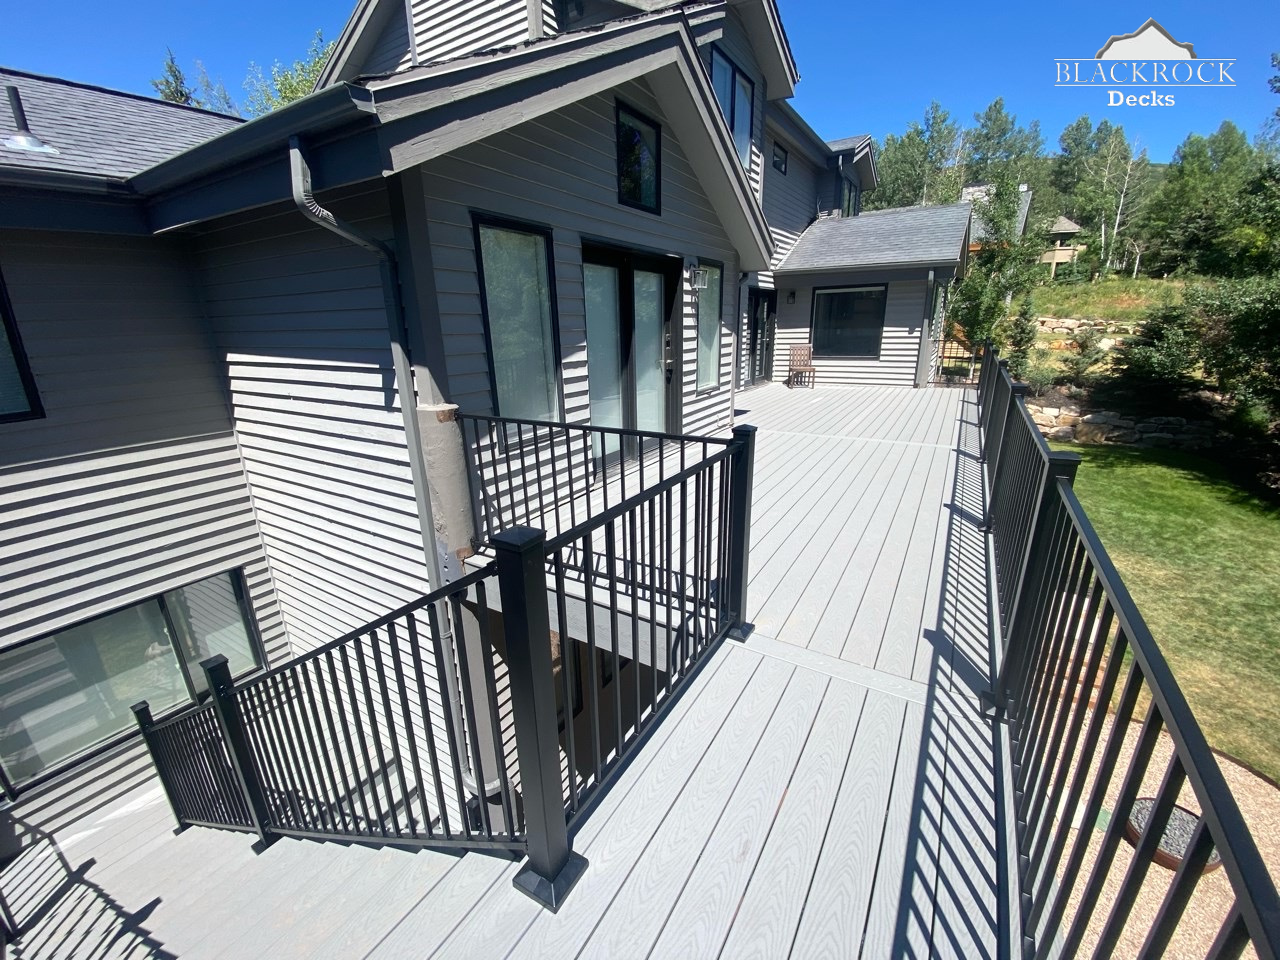 Blackrock Decks is proud to be one of the best deck builders in Layton, Utah. Contact us for a quote on your next project.